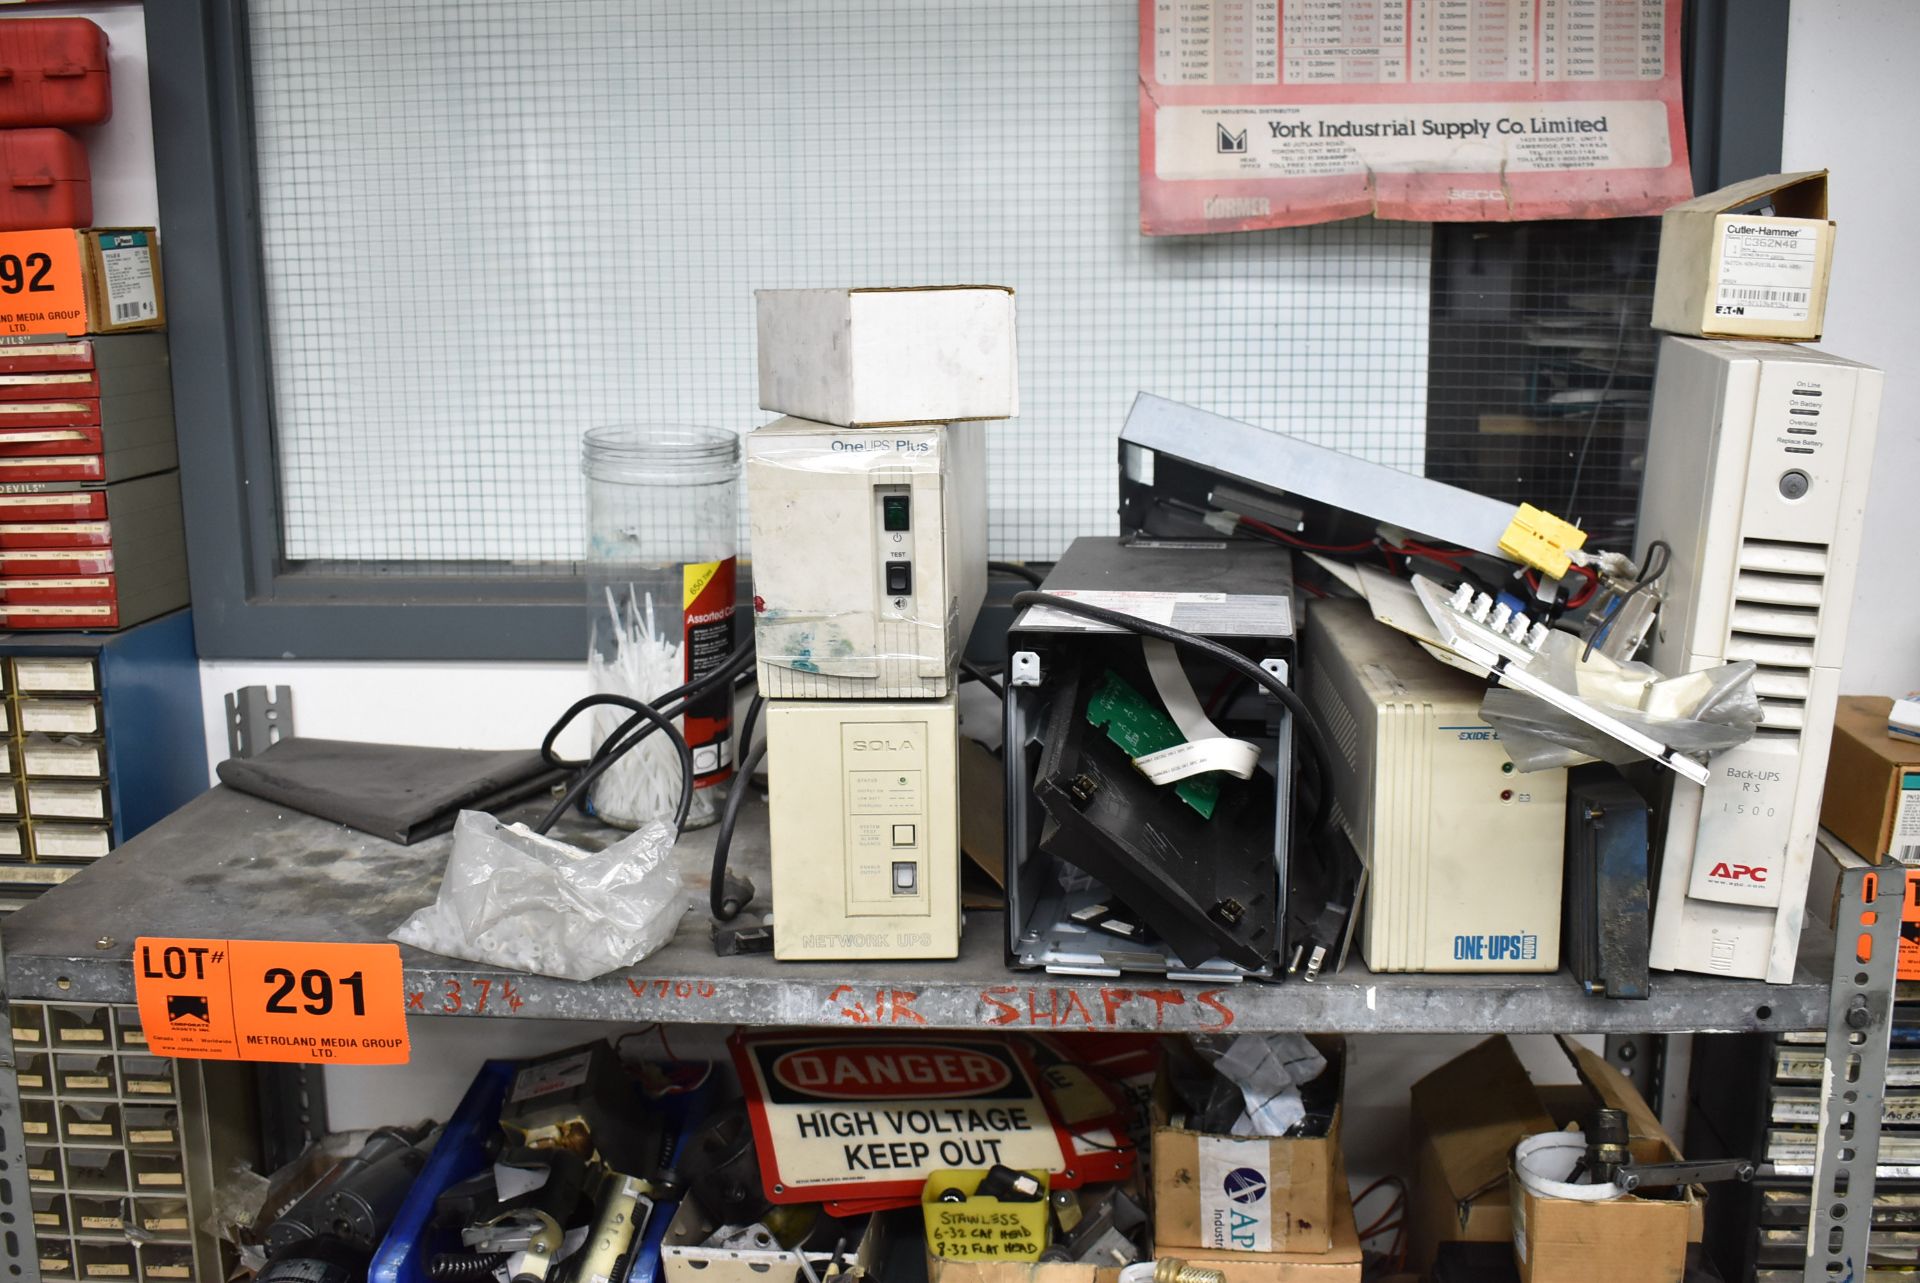 LOT/ STEEL SHELF WITH CONTENTS - INCLUDING UPS MODULES, SIGNAGE, BATTERIES, ELECTRICAL CONNECTORS, - Image 2 of 4